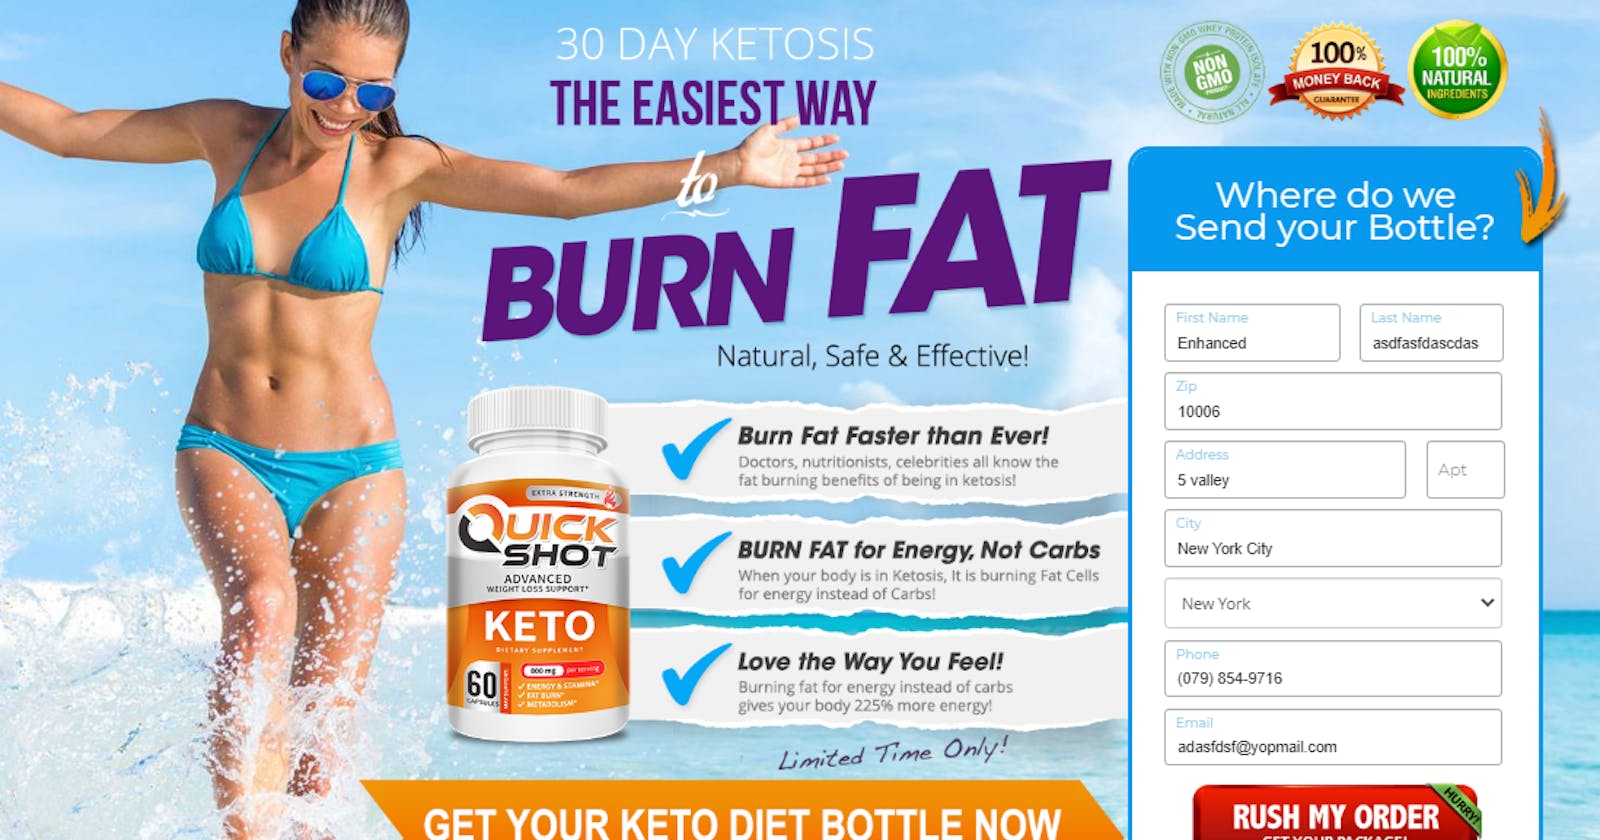 Quick Shot Keto |#EXCITING NEWS|: *Get Fat Busting Help With Keto!